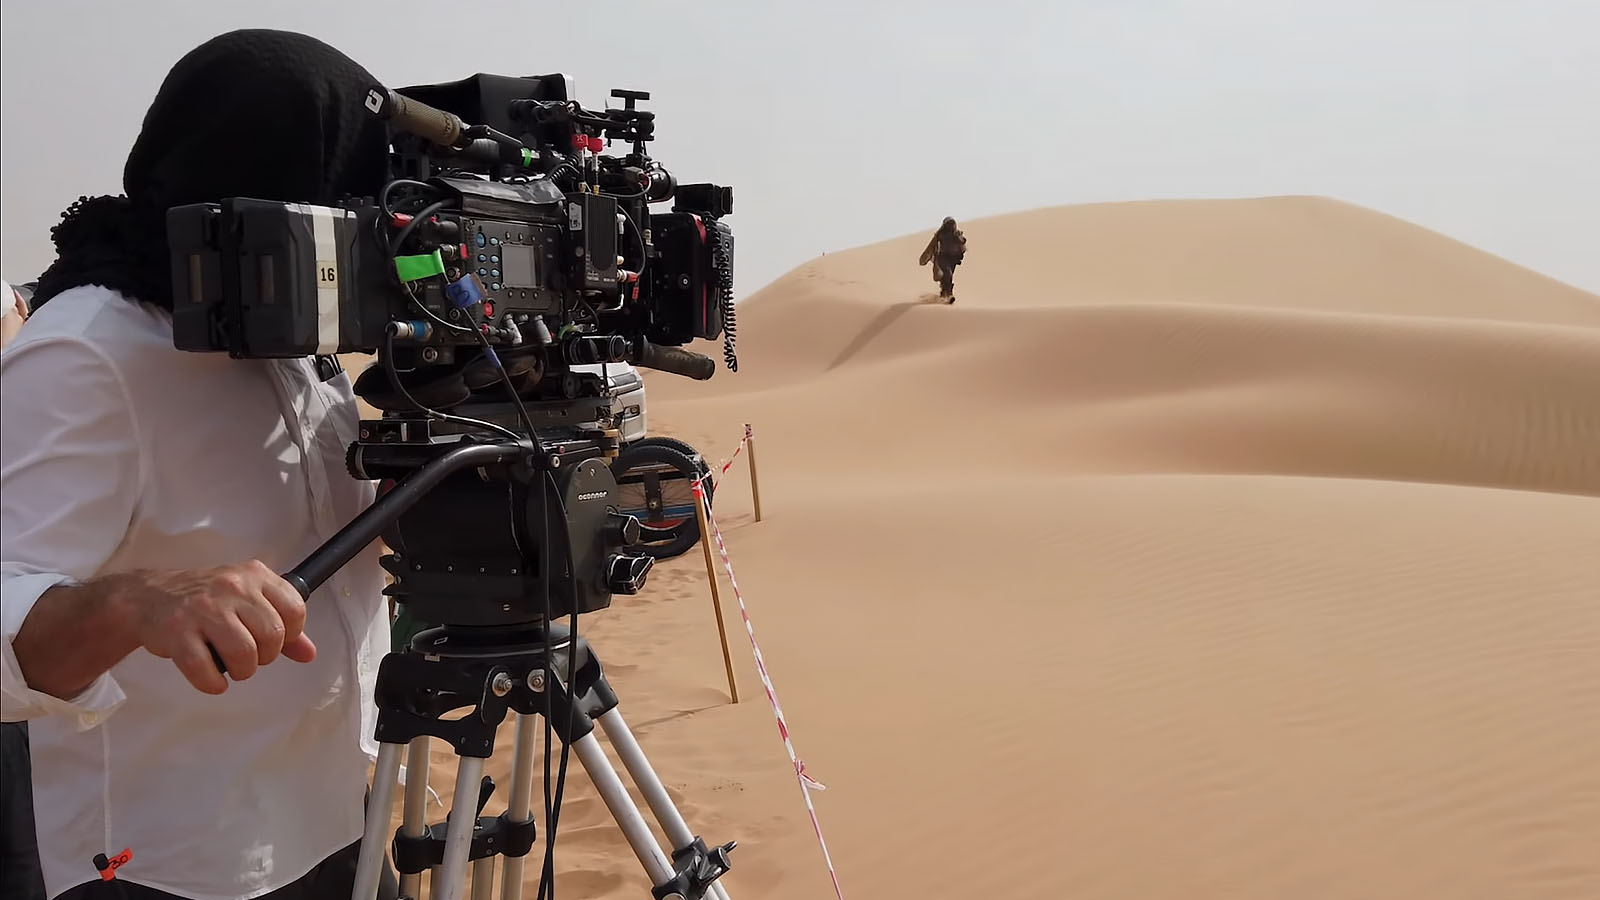 ARRI Alexa LF on location in Morocco for the filming of Dune. Image © Warner Bros.